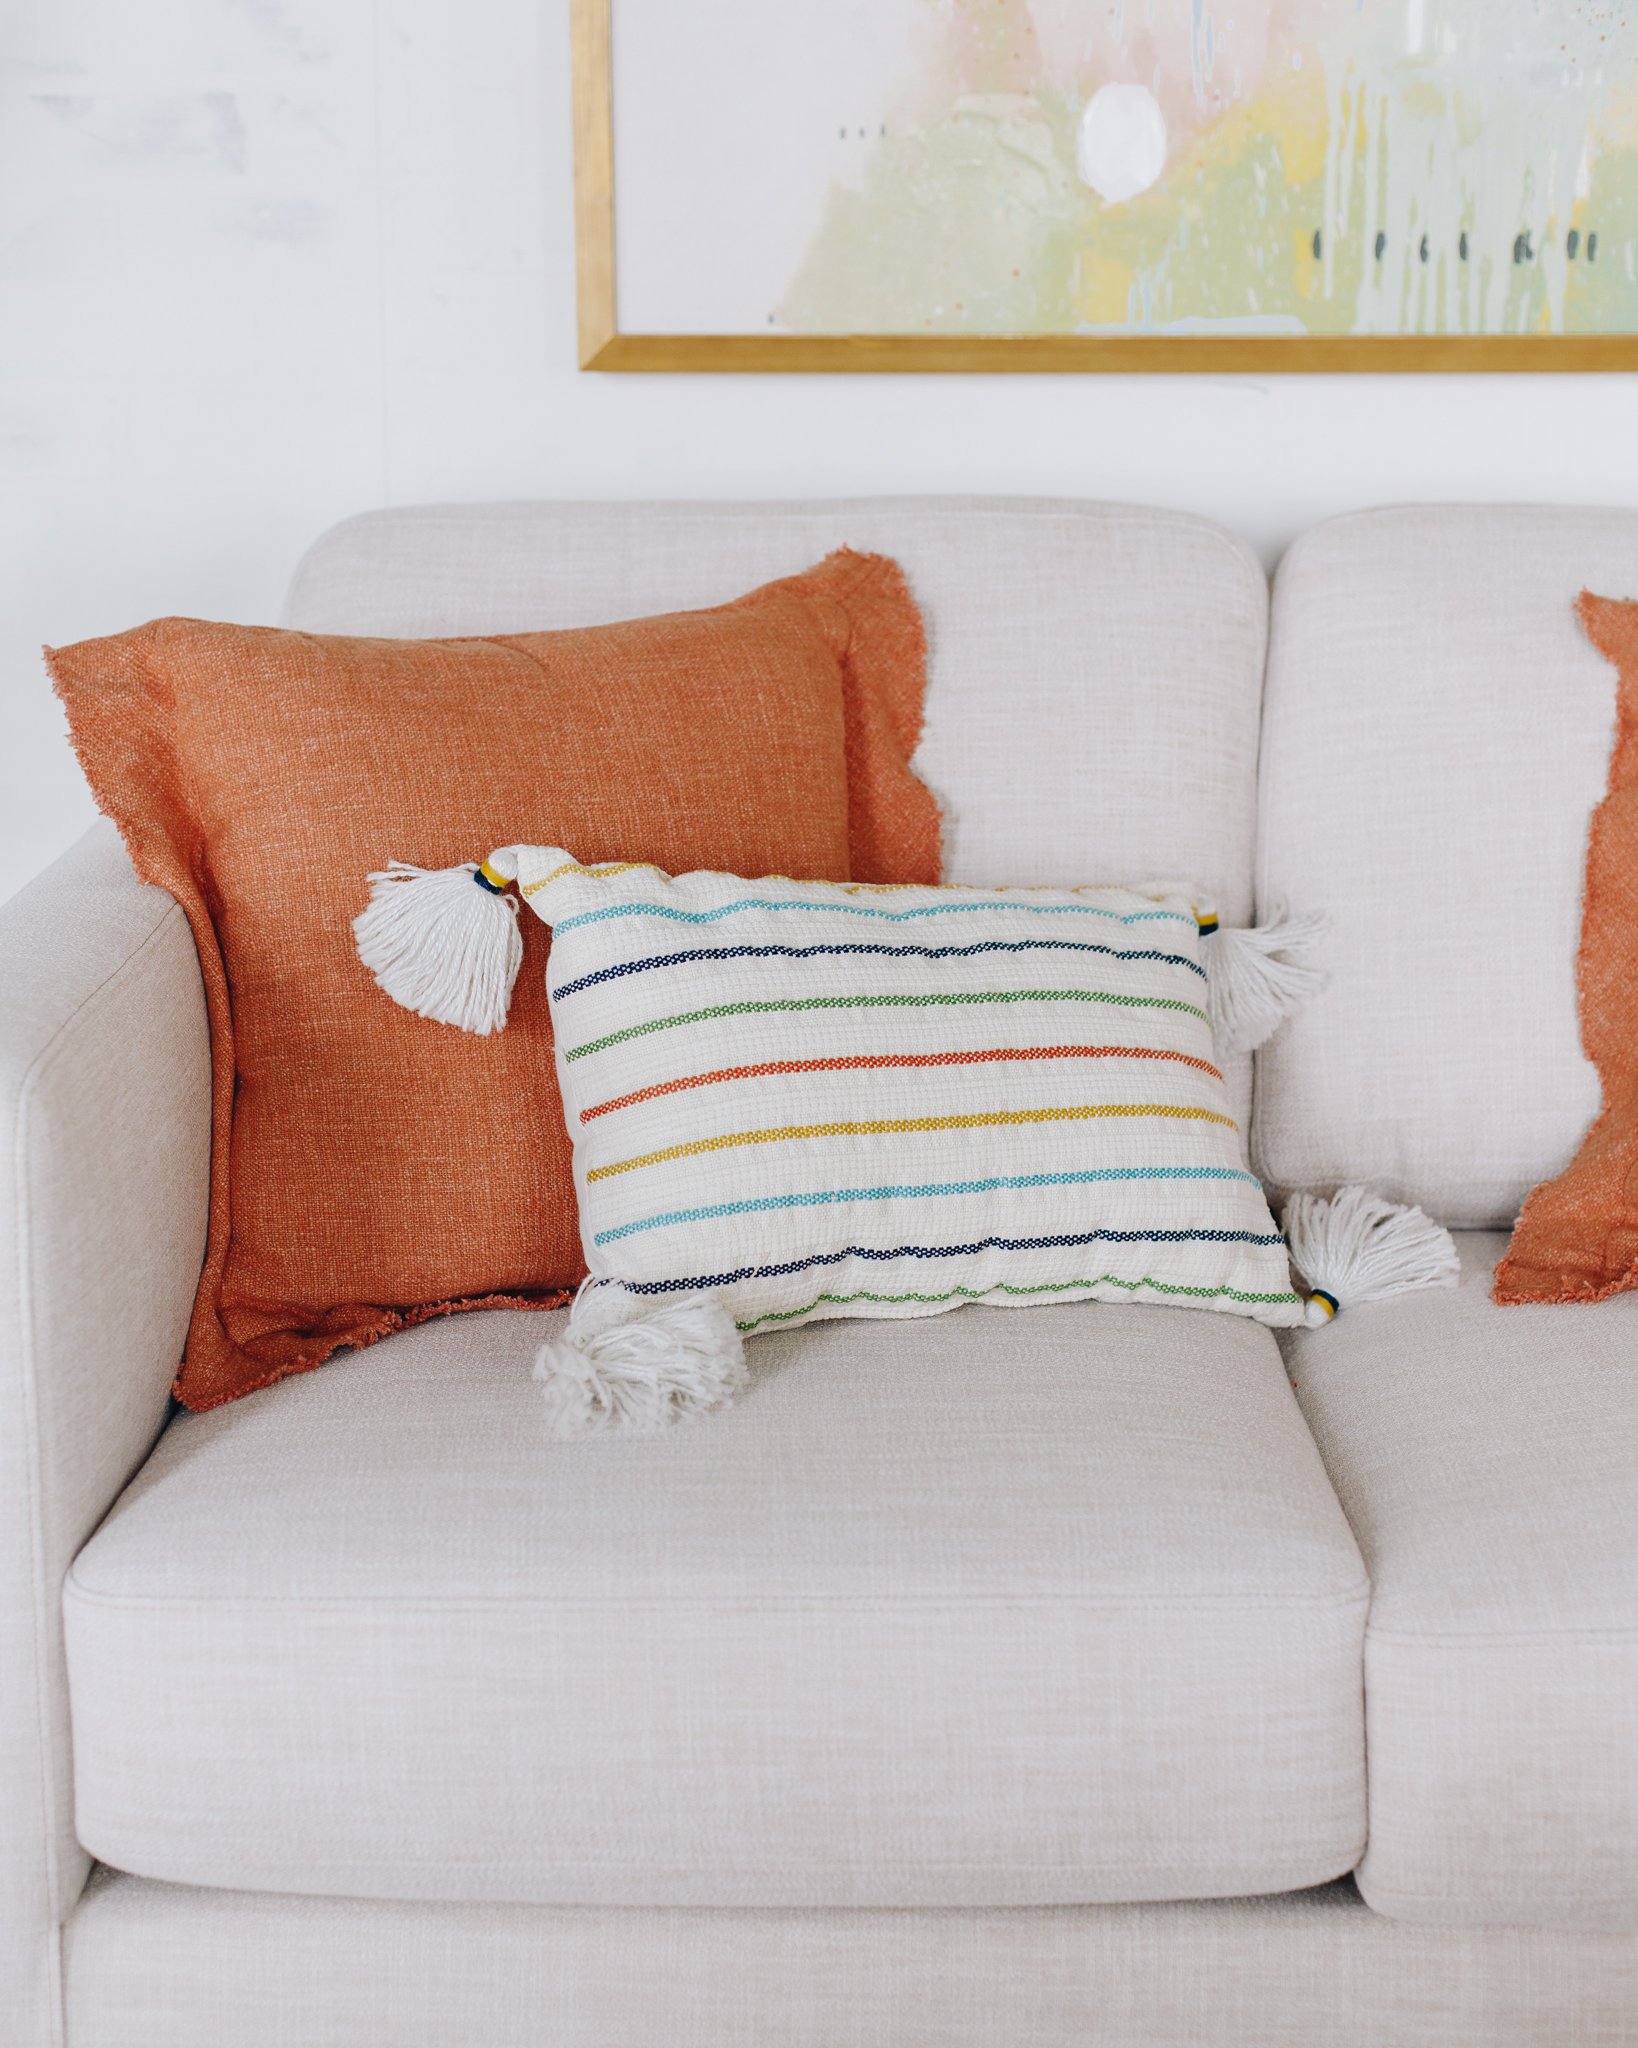 Maximal Minimalism Pillows on a Couch